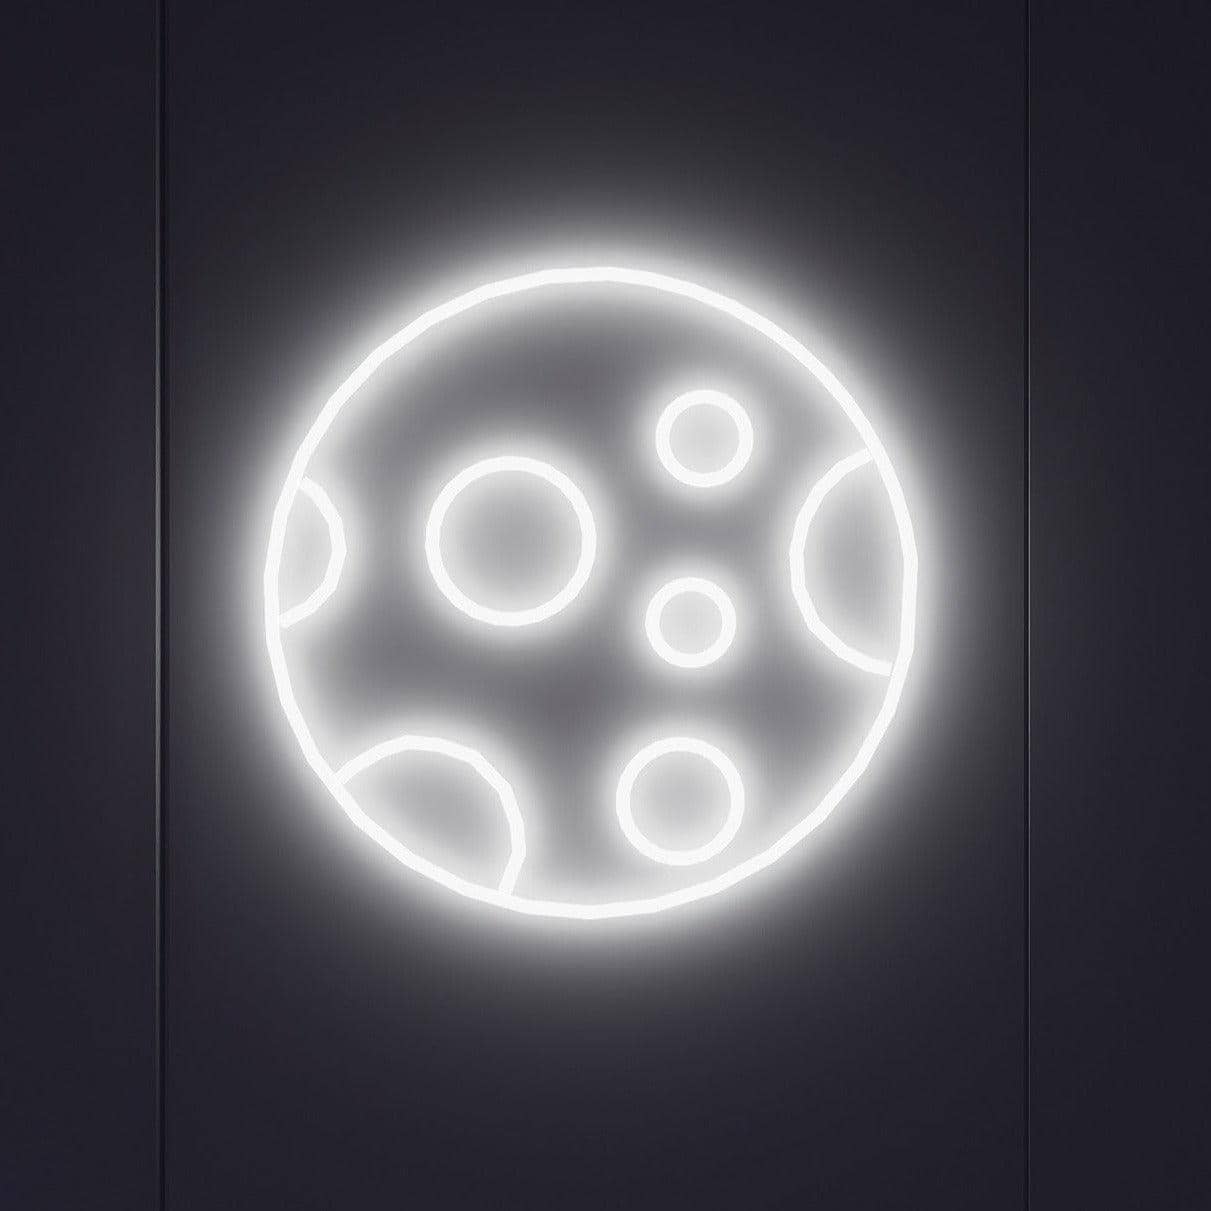 light-up-neon-lights-and-hang-them-in-your-bedroom-for-display-moon